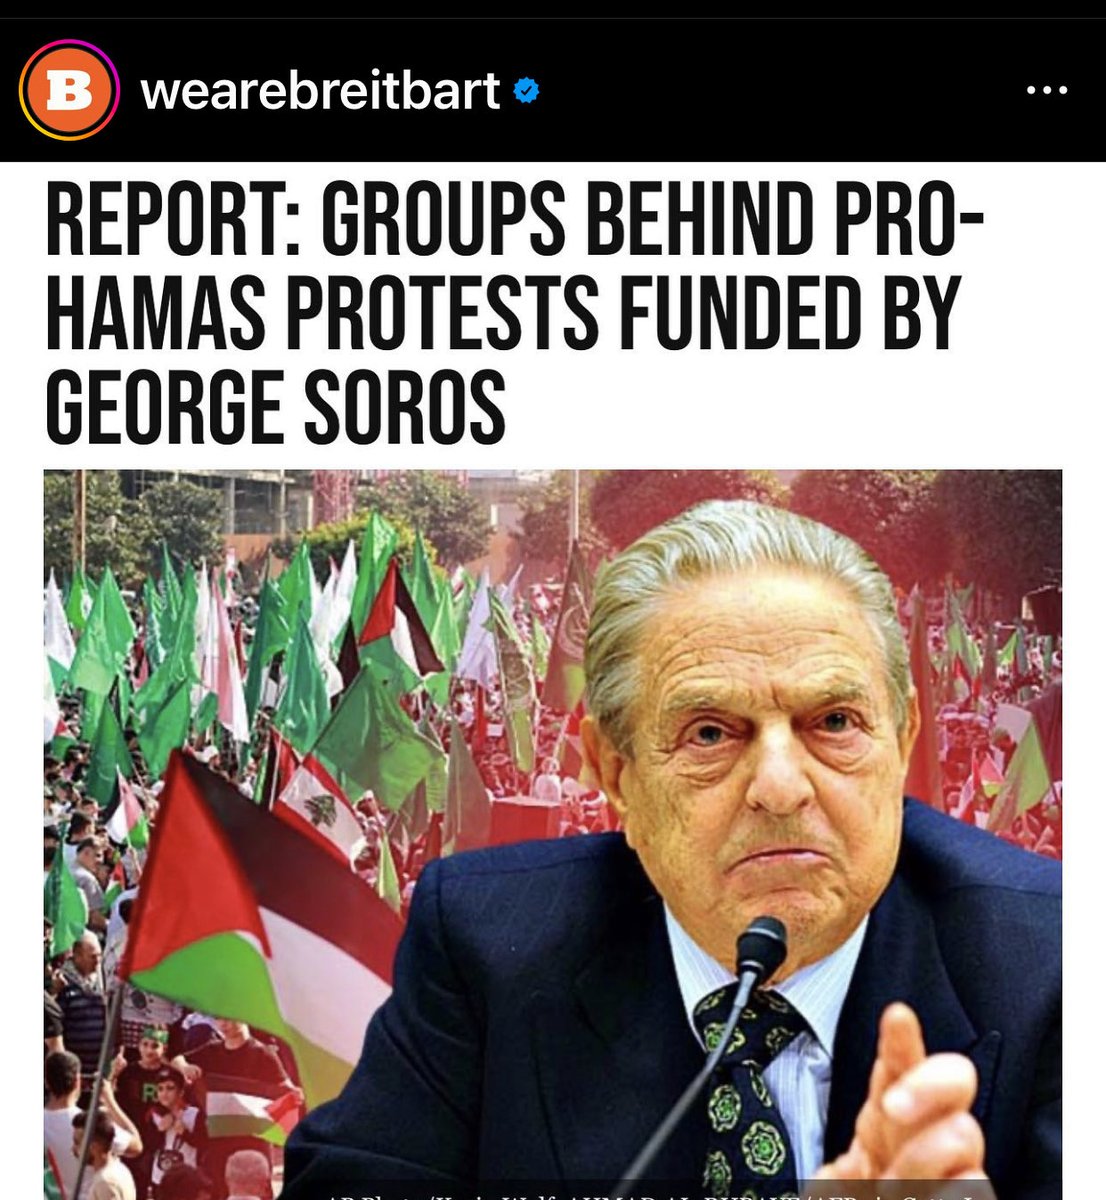 People are so fkn dumb falling for Soros’s propaganda. He’s evil ! He lives off dividing people and ruining economies.